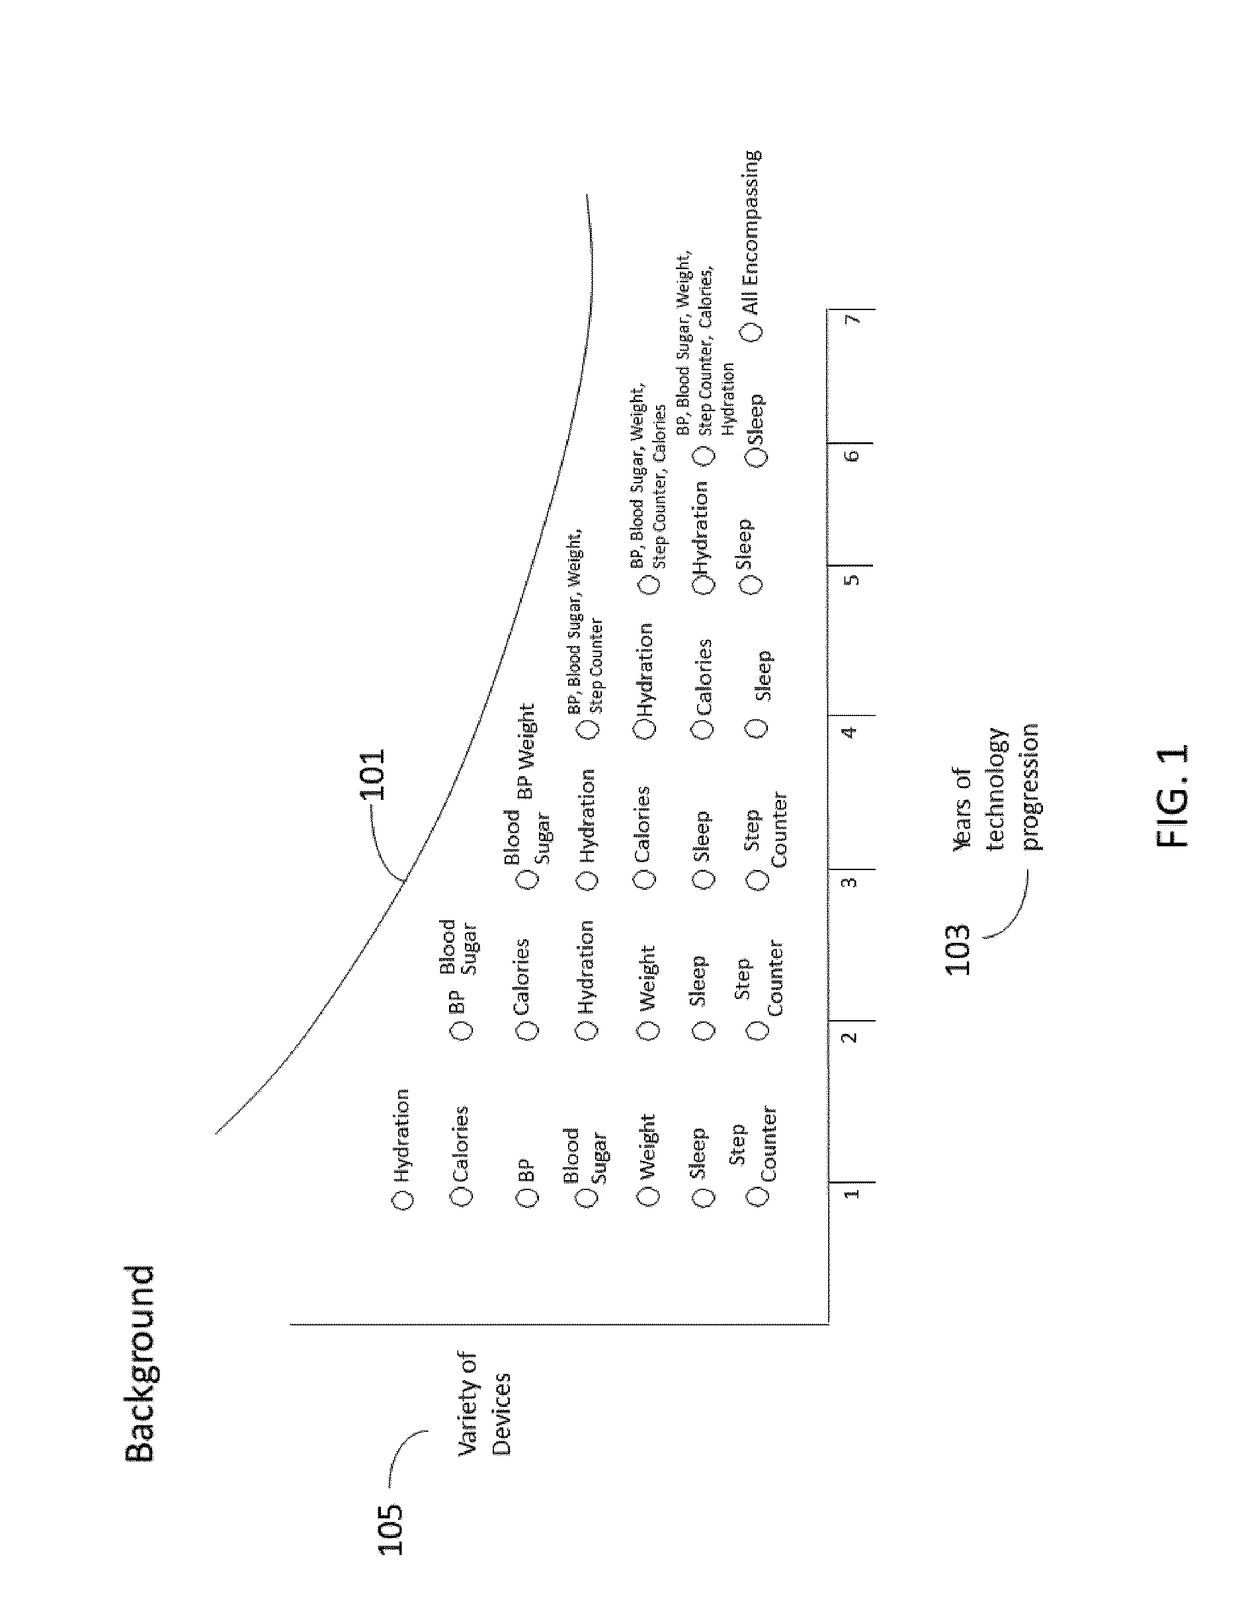 System and method for providing connecting relationships between wearable devices